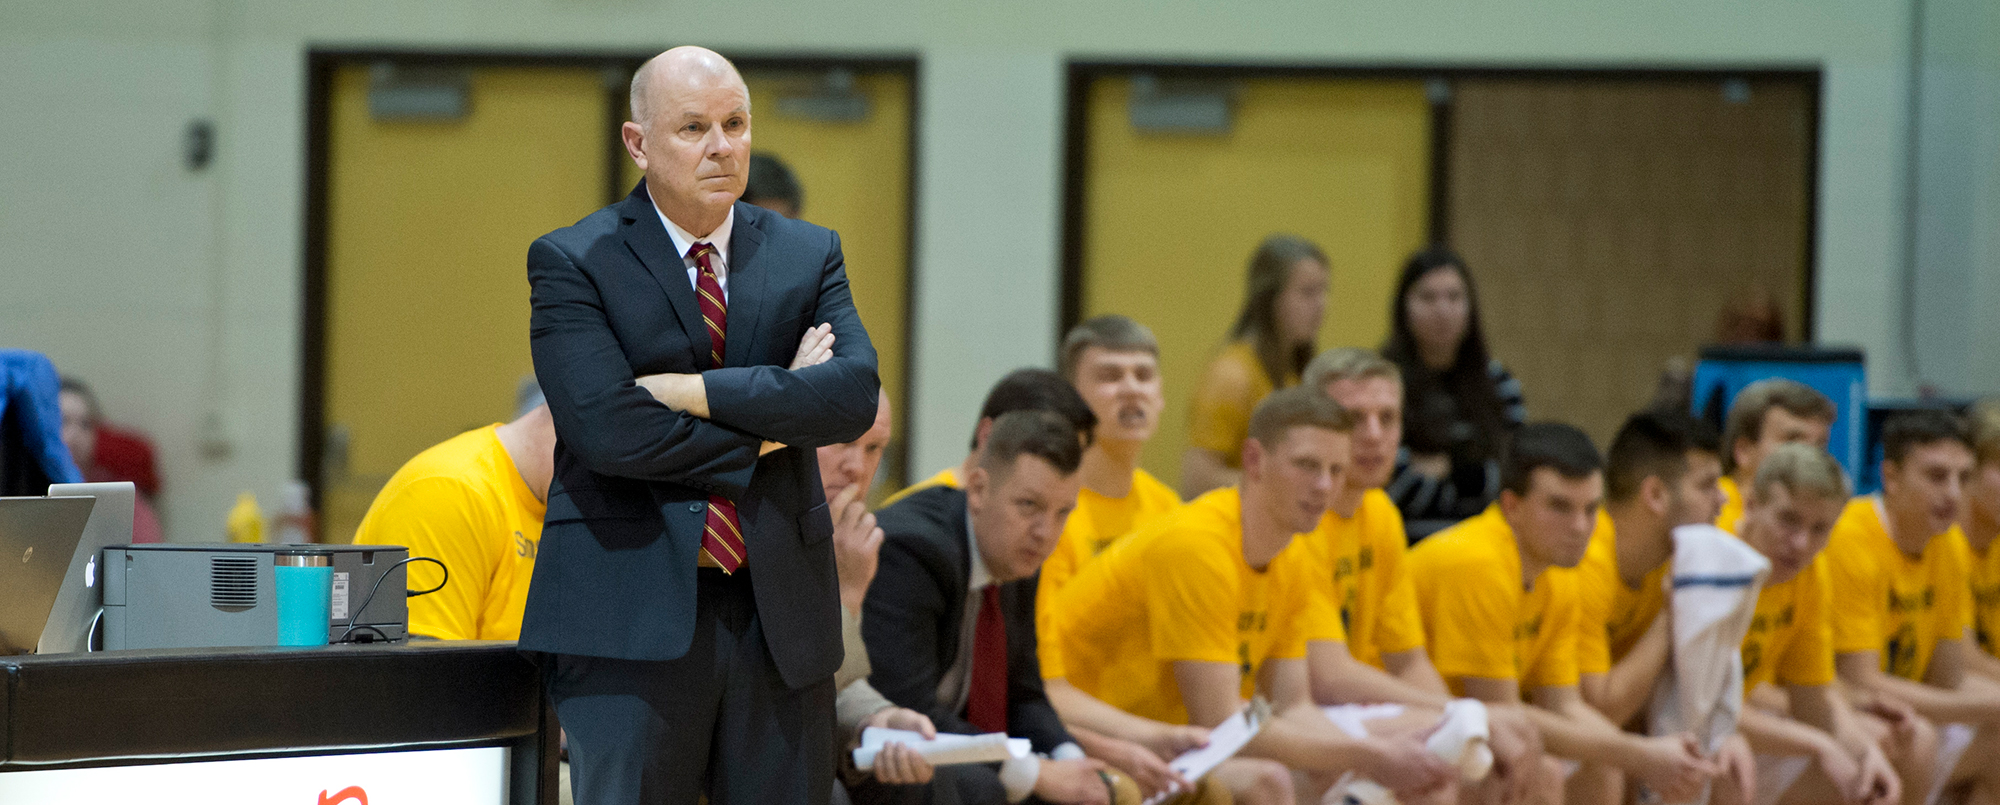 MBB Preview: Storm prepare for tough matchup at Coe